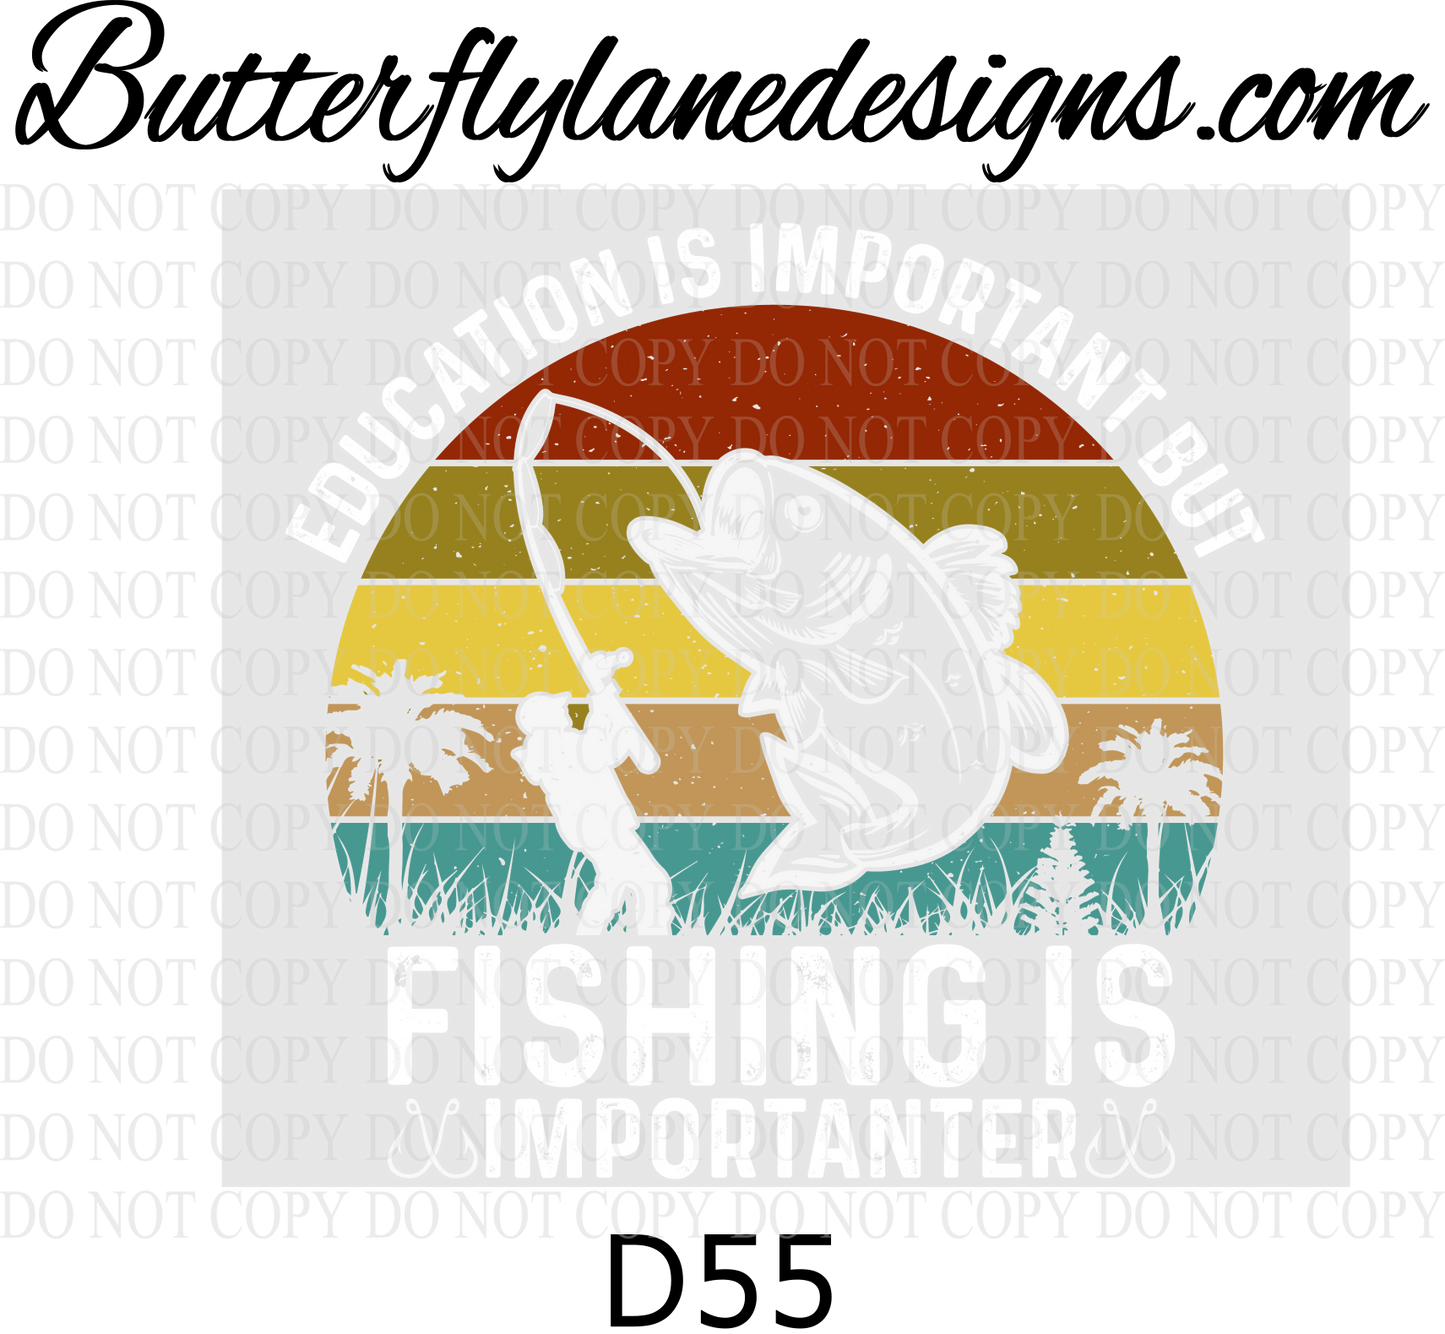 D55 Education is important but fishing :: Clear Decal :: VC Decal